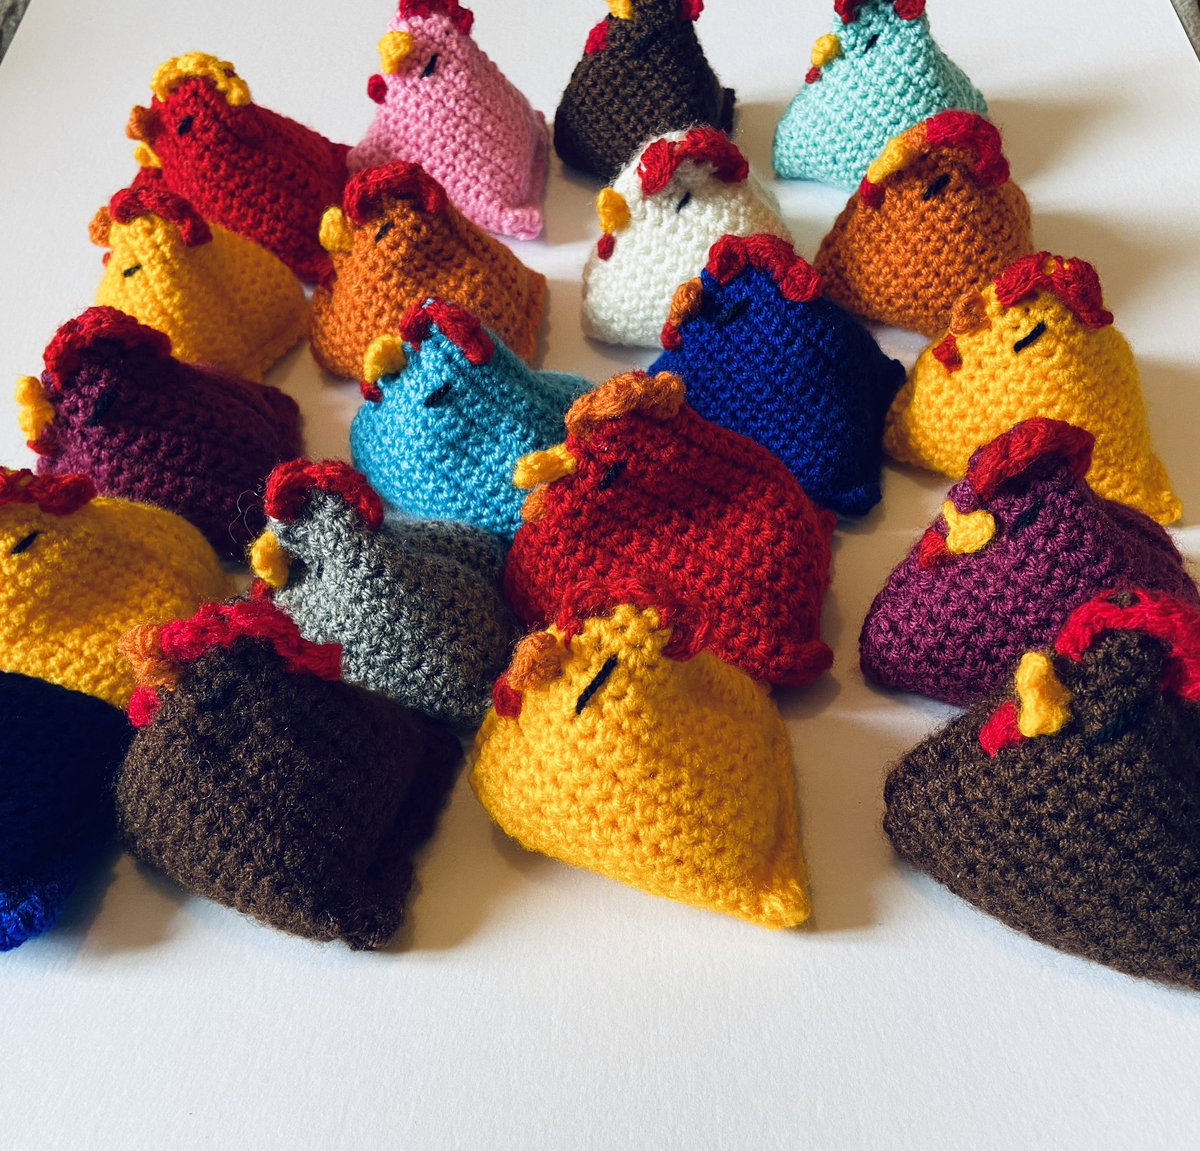 It’s #nationalpoultryday so here’s a throwback to some colourful chicks I made a couple of years ago. Chick bean bags are available in my #etsy shop etsy.com/uk/shop/OkThen… #crochet #easter #crochet #earlbiz #earlybiz